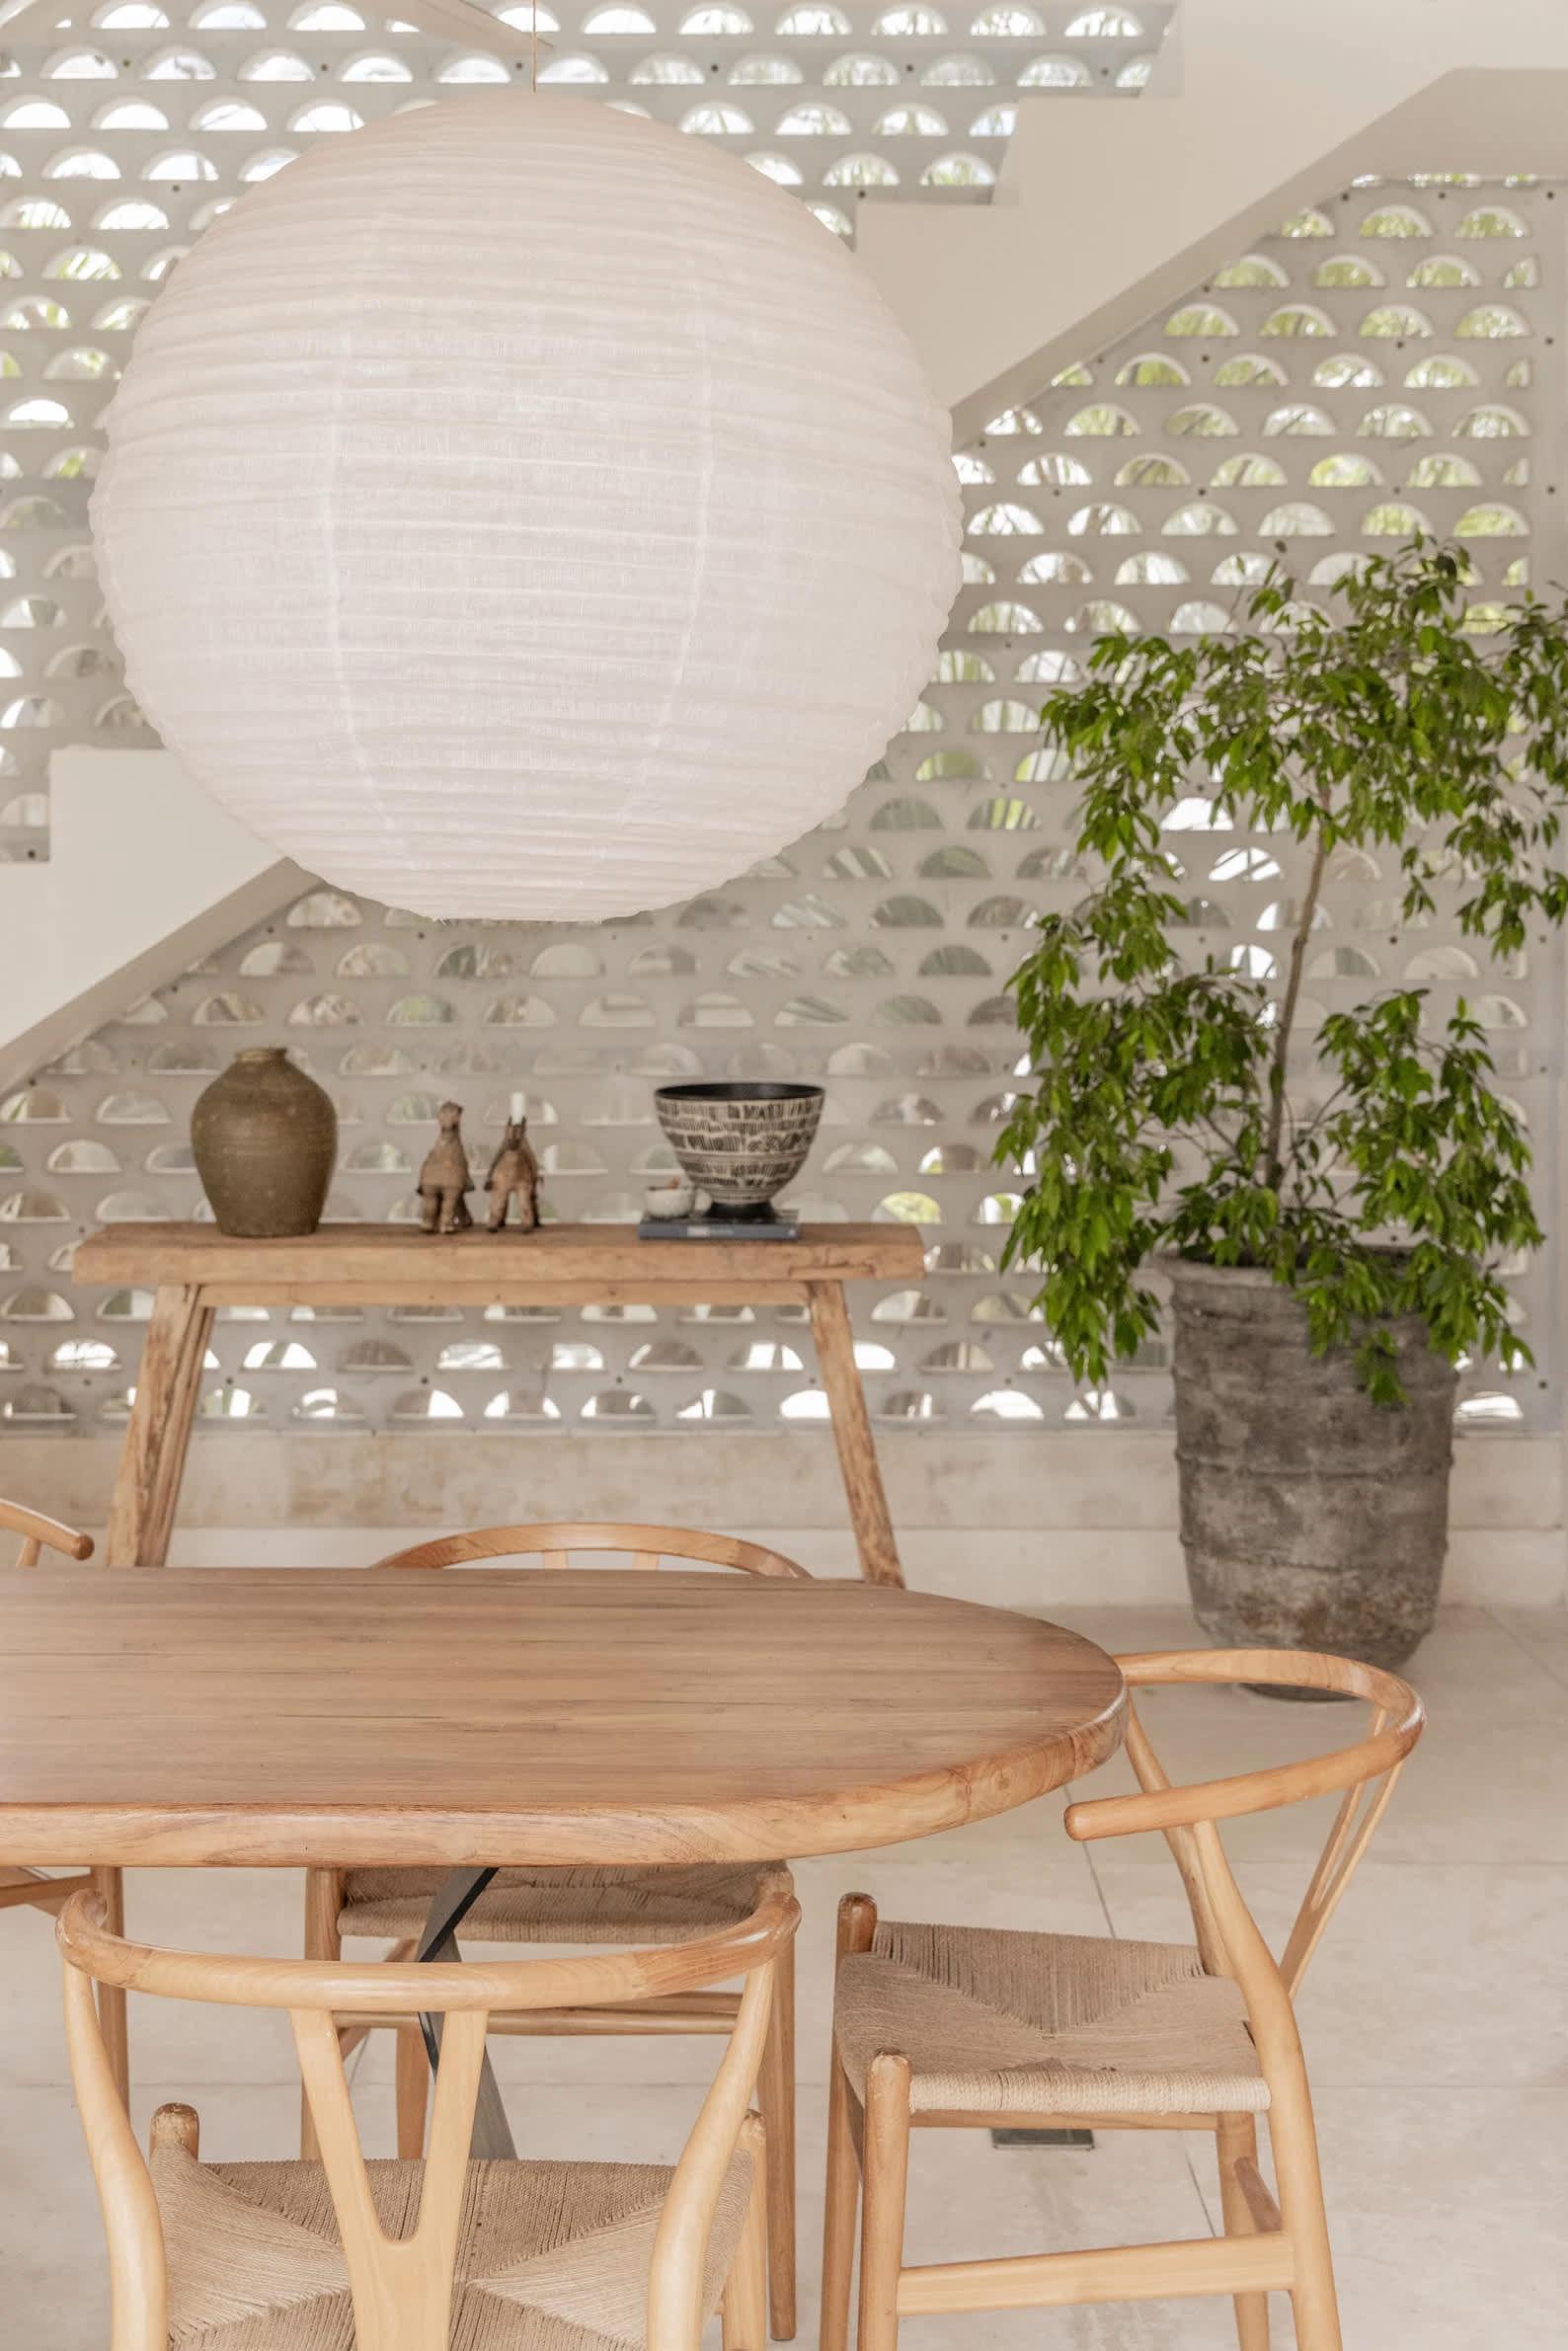 5 Outdoor Decorating Trends Experts Predict for 2023